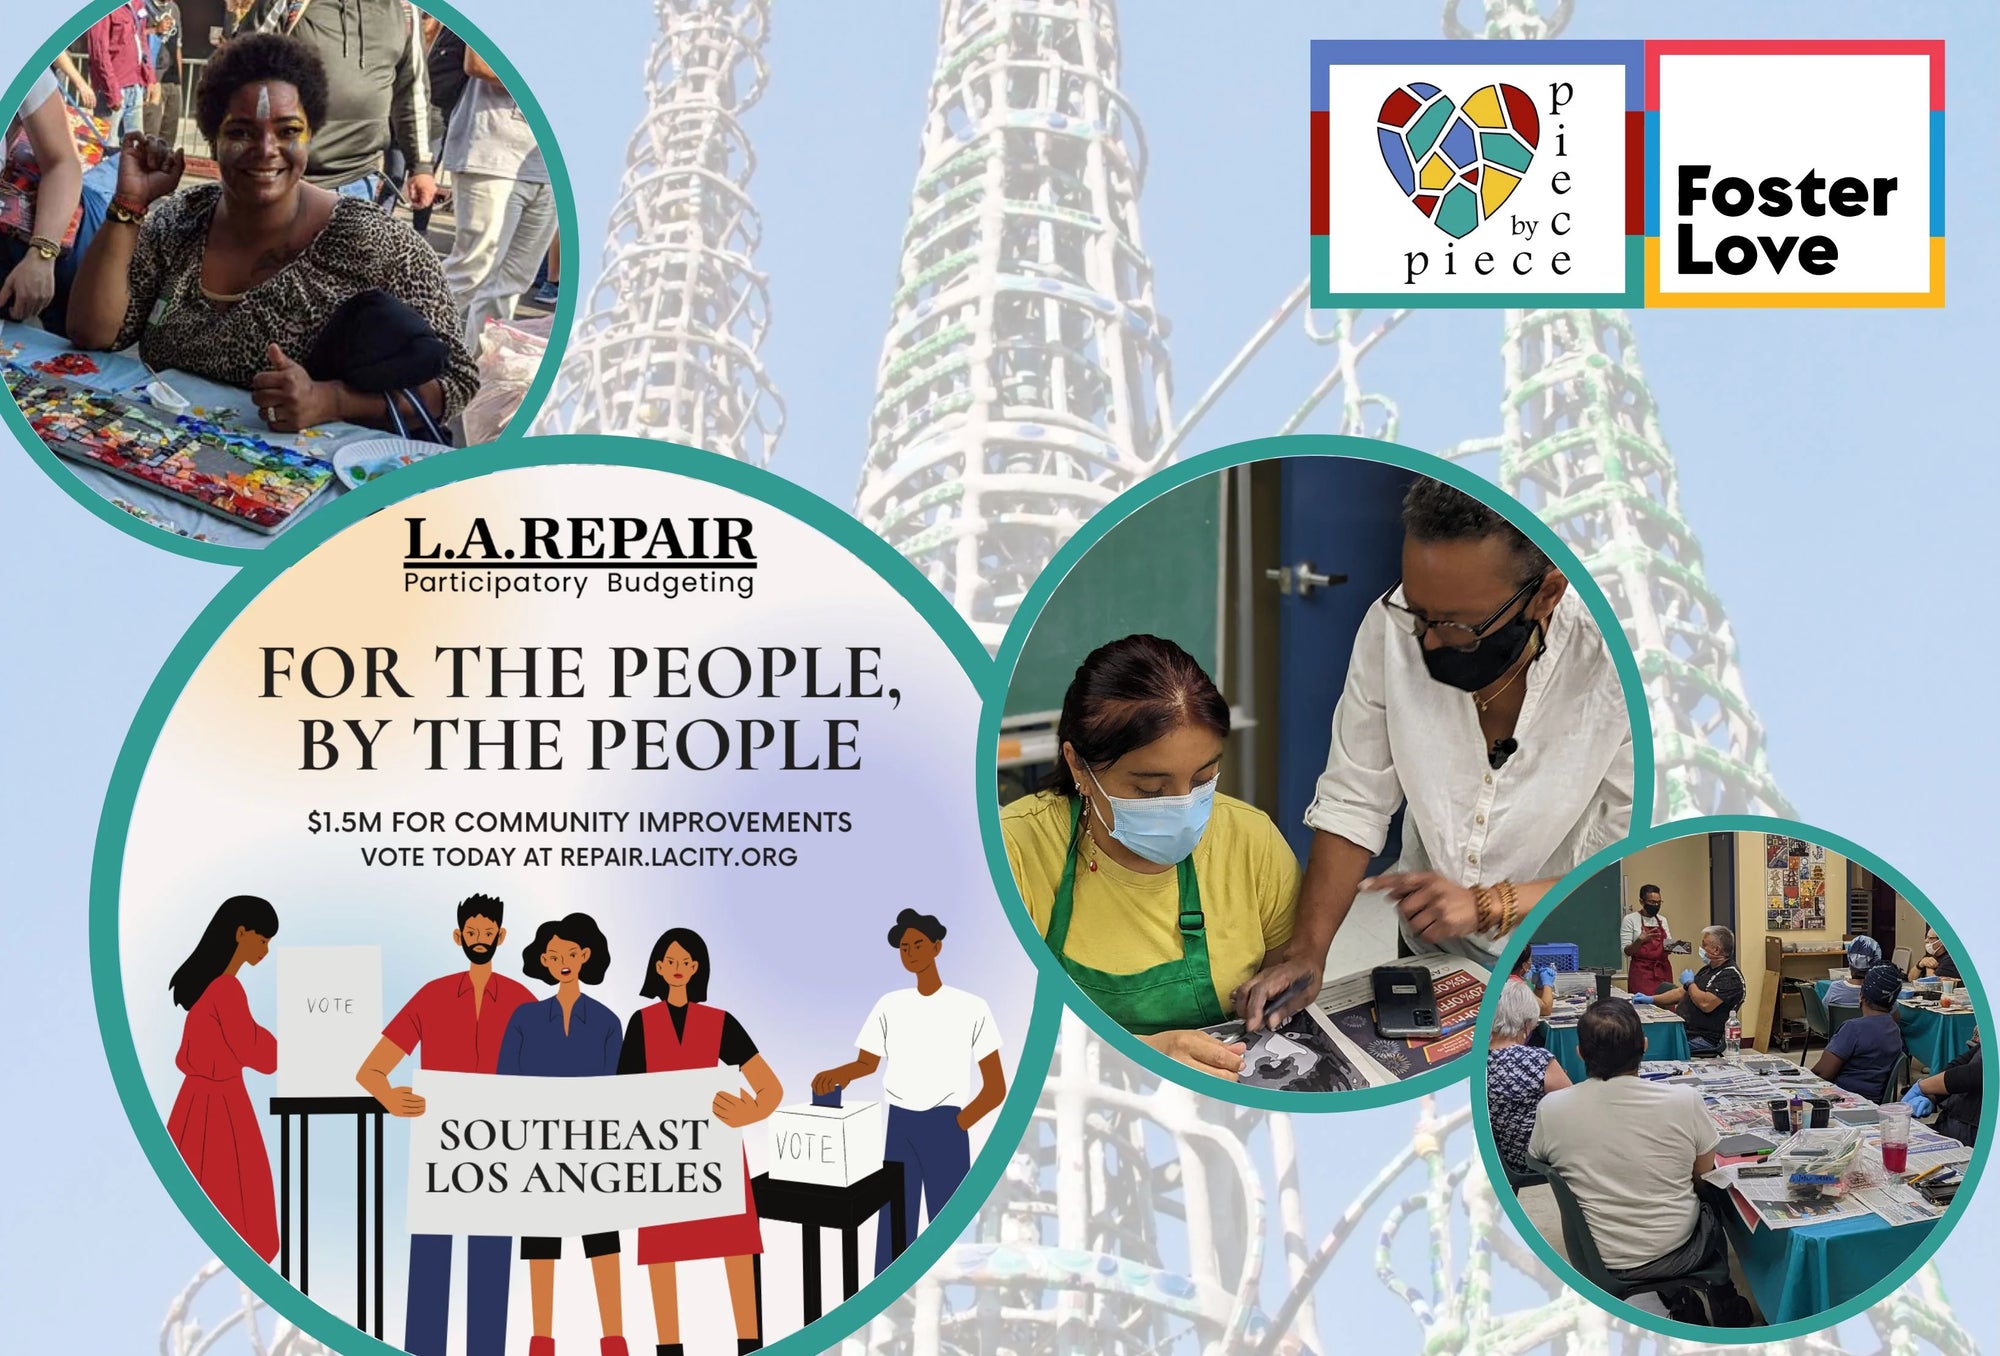 Piece by Piece is on the ballot as Proposal F in L.A. REPAIR Participatory Budgeting Grant for "Pieces of Love" in Southeast LA - Southeast La residents VOTE TODAY